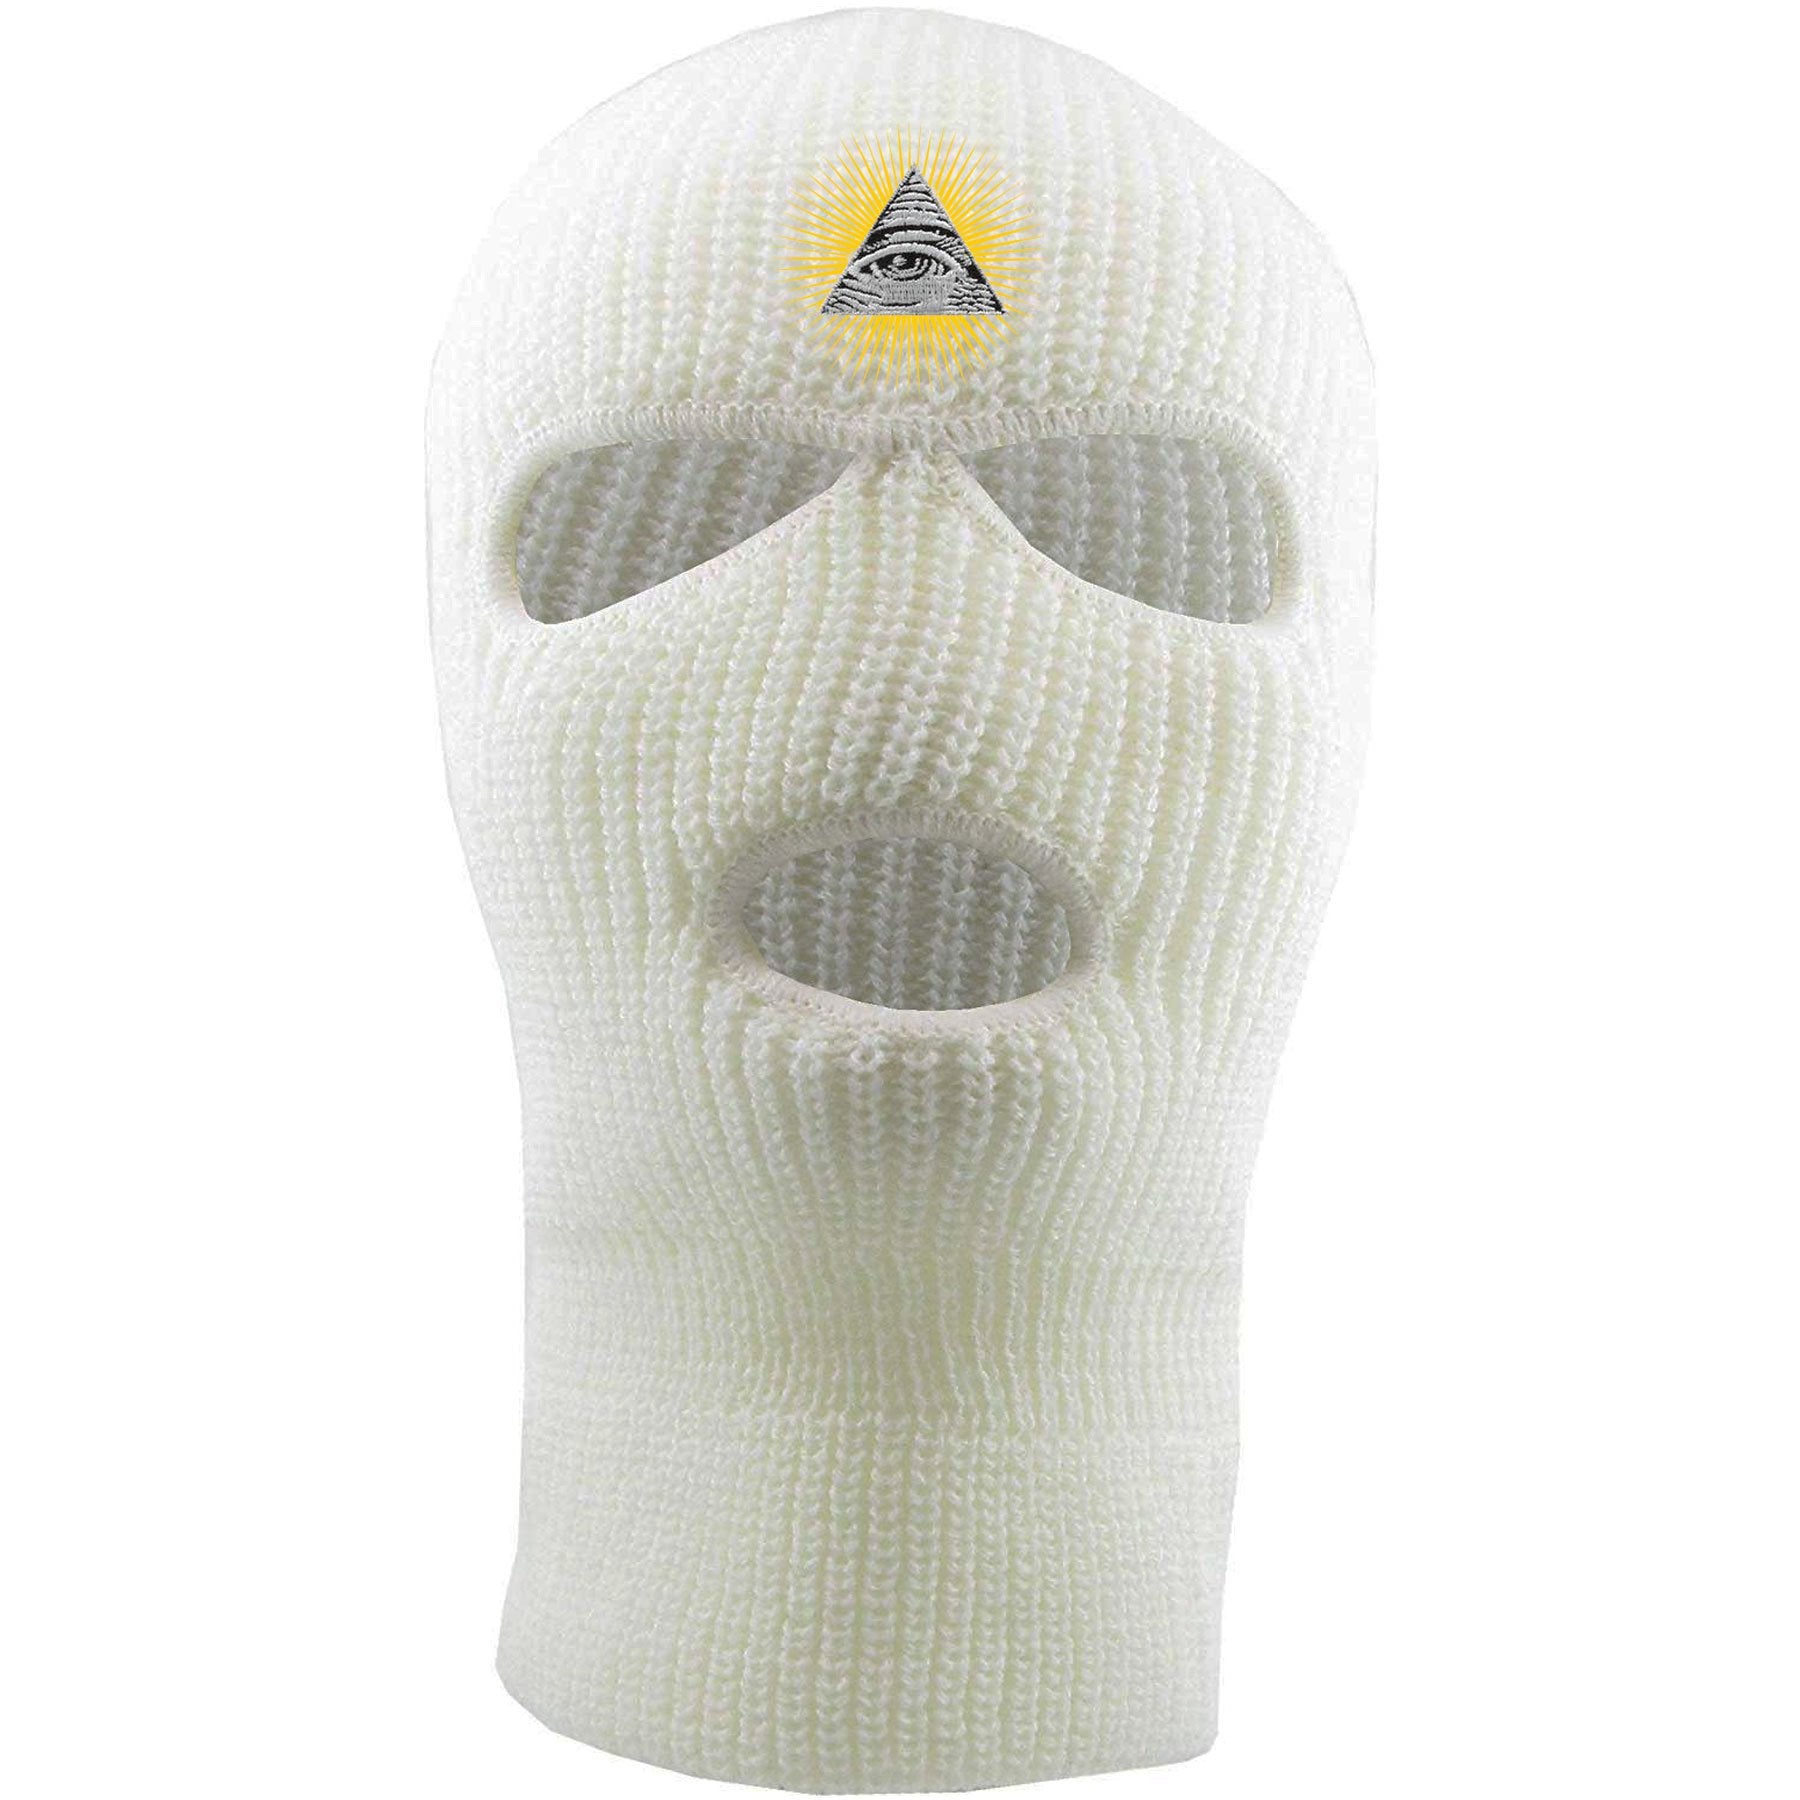 Embroidered on the forehead of the white pyramid ski mask is the all seeing eye logo embroidered in white, black, and gold